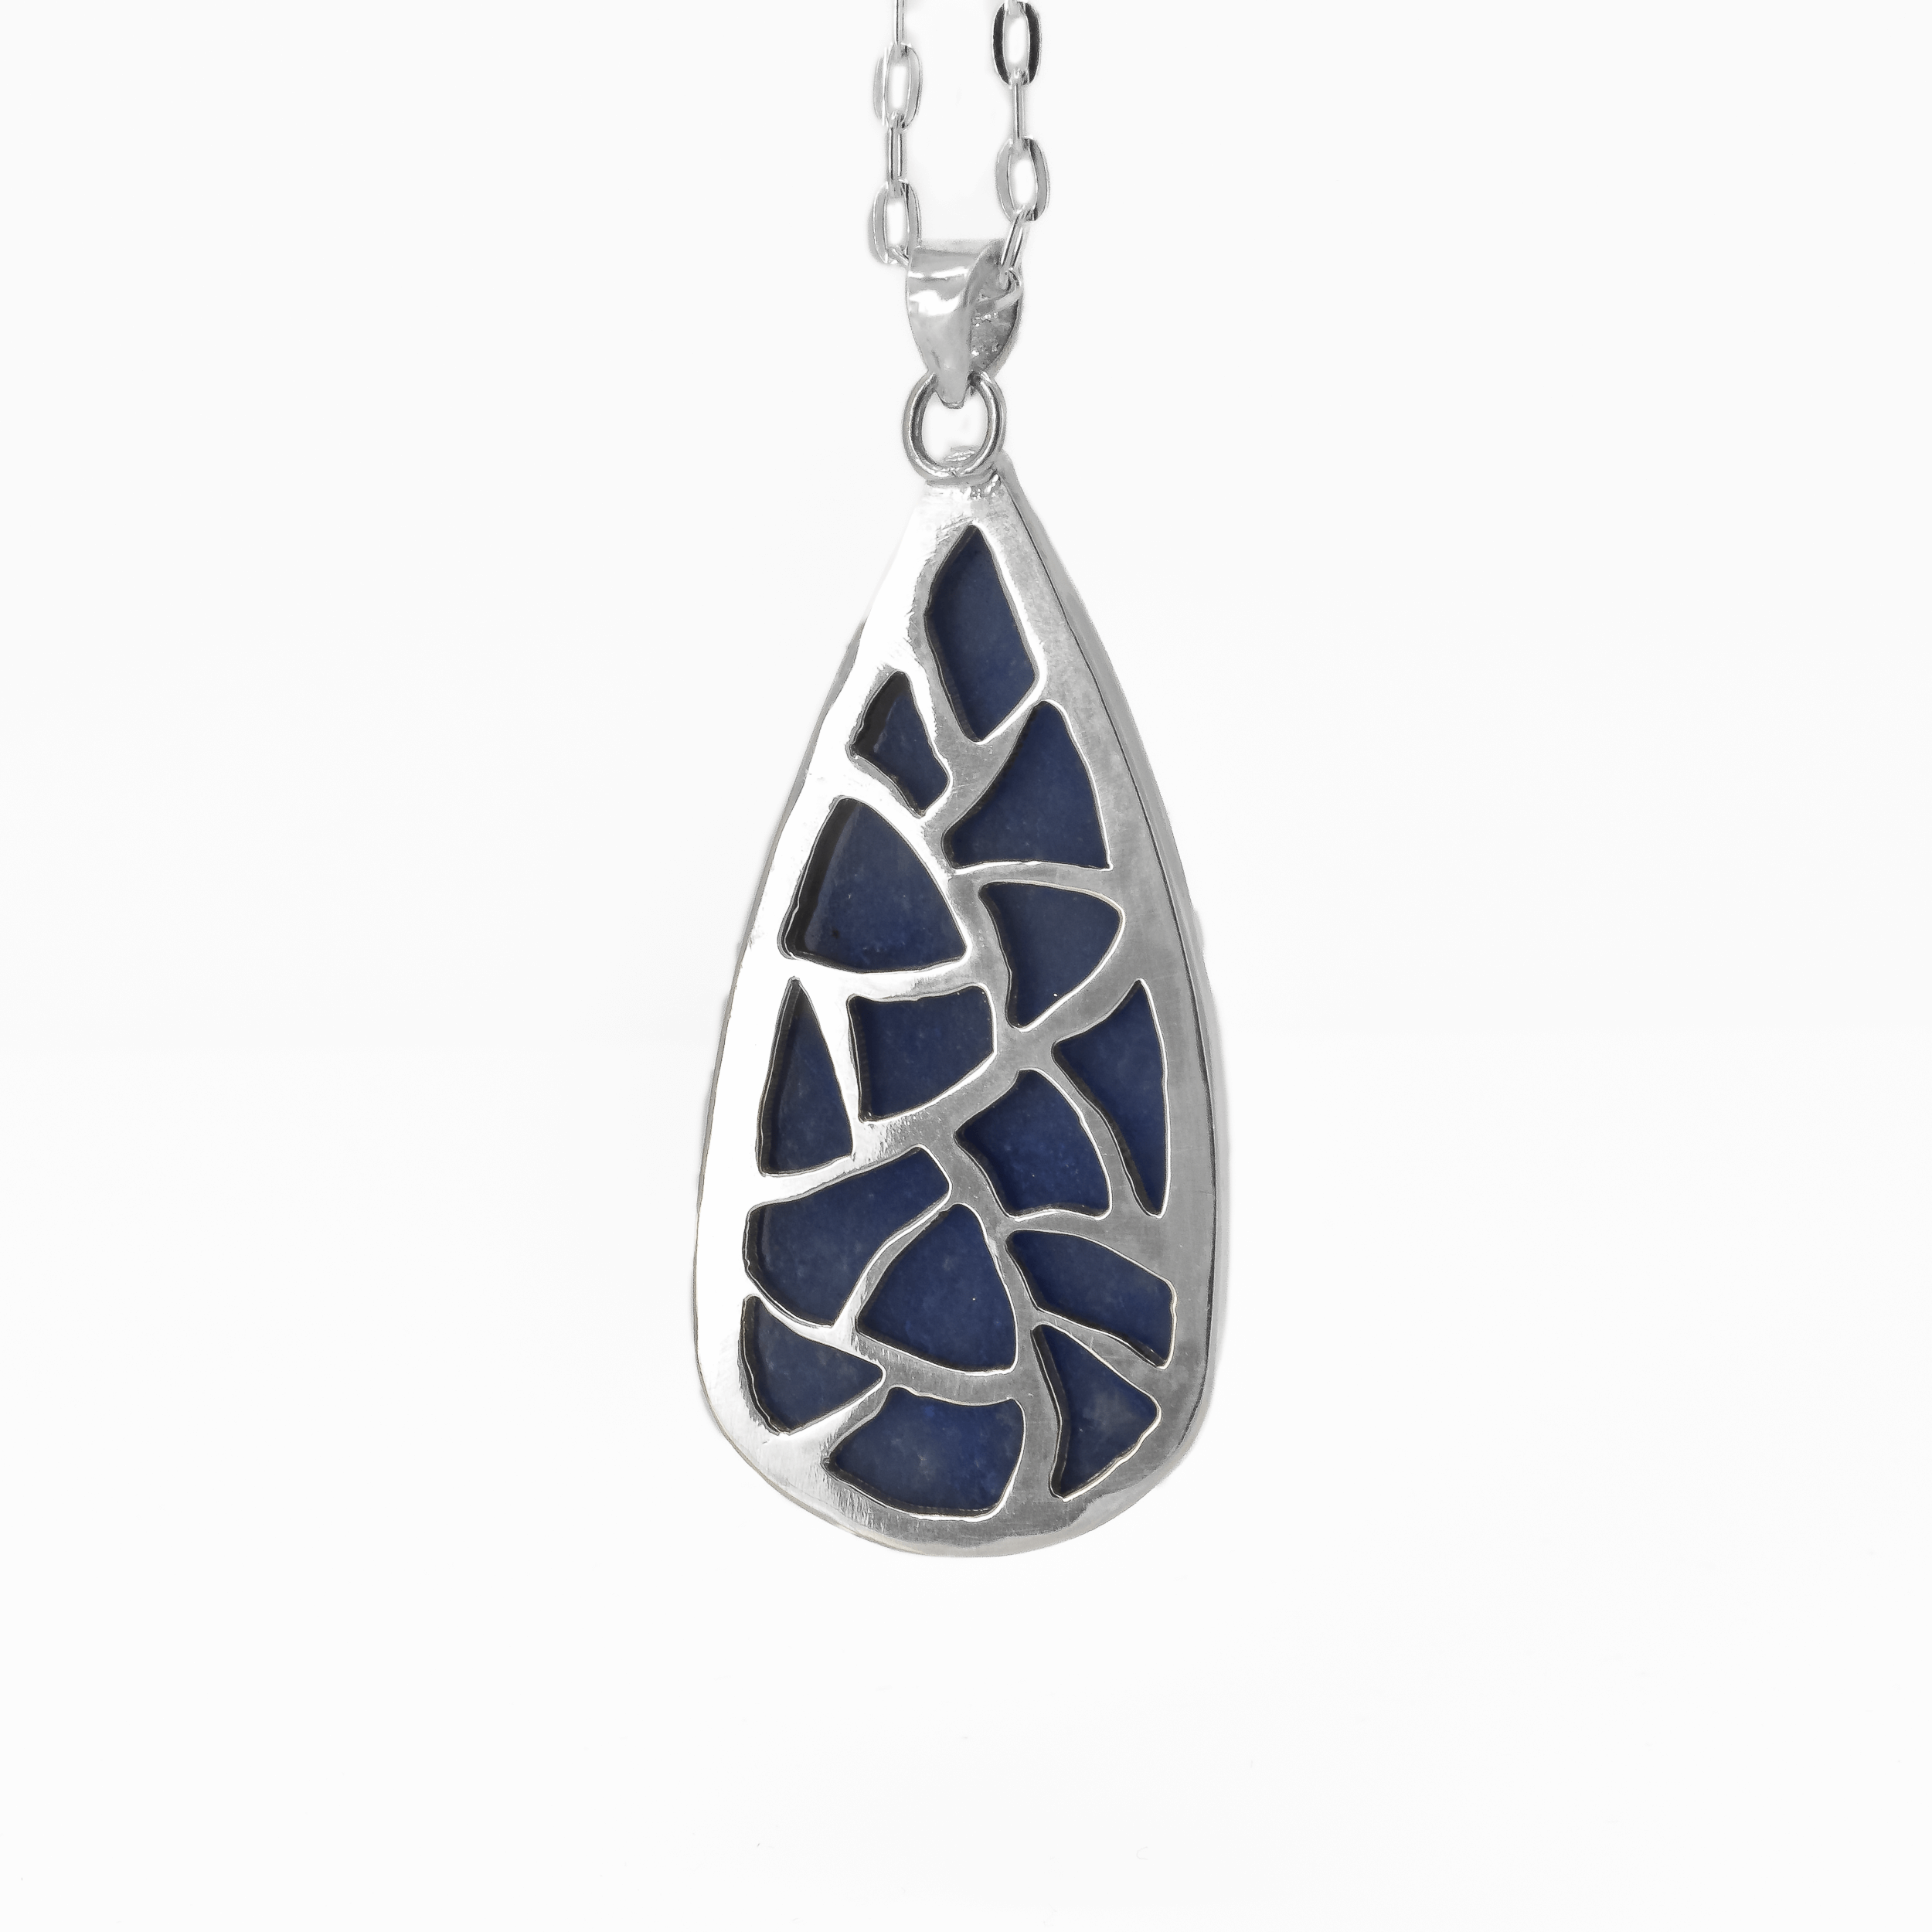 Back of a blue aventurine statement pendant which is pierced out with an irregular design